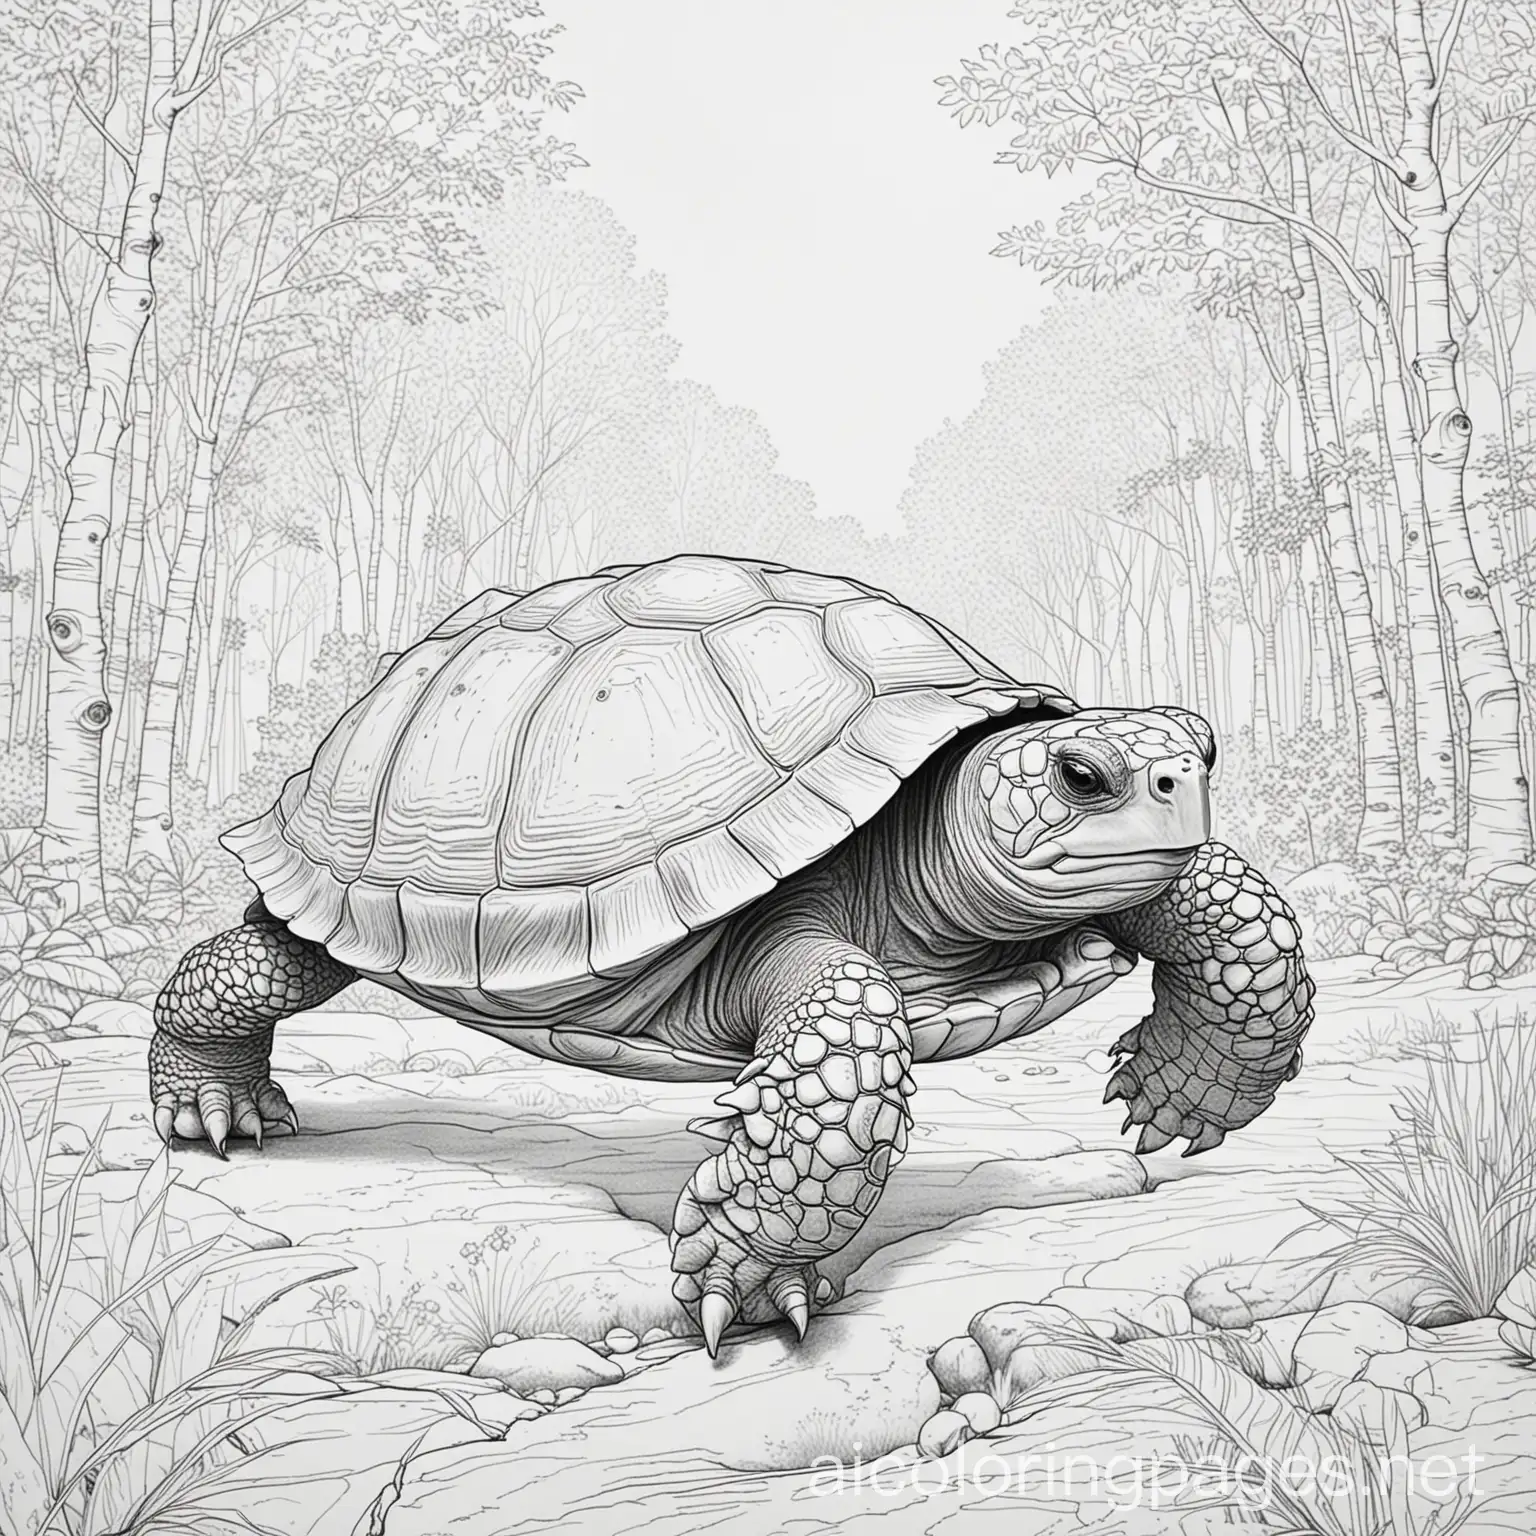 colouring book forest tortoise with action moment, Coloring Page, black and white, line art, white background, Simplicity, Ample White Space. The background of the coloring page is plain white to make it easy for young children to color within the lines. The outlines of all the subjects are easy to distinguish, making it simple for kids to color without too much difficulty, Coloring Page, black and white, line art, white background, Simplicity, Ample White Space. The background of the coloring page is plain white to make it easy for young children to color within the lines. The outlines of all the subjects are easy to distinguish, making it simple for kids to color without too much difficulty